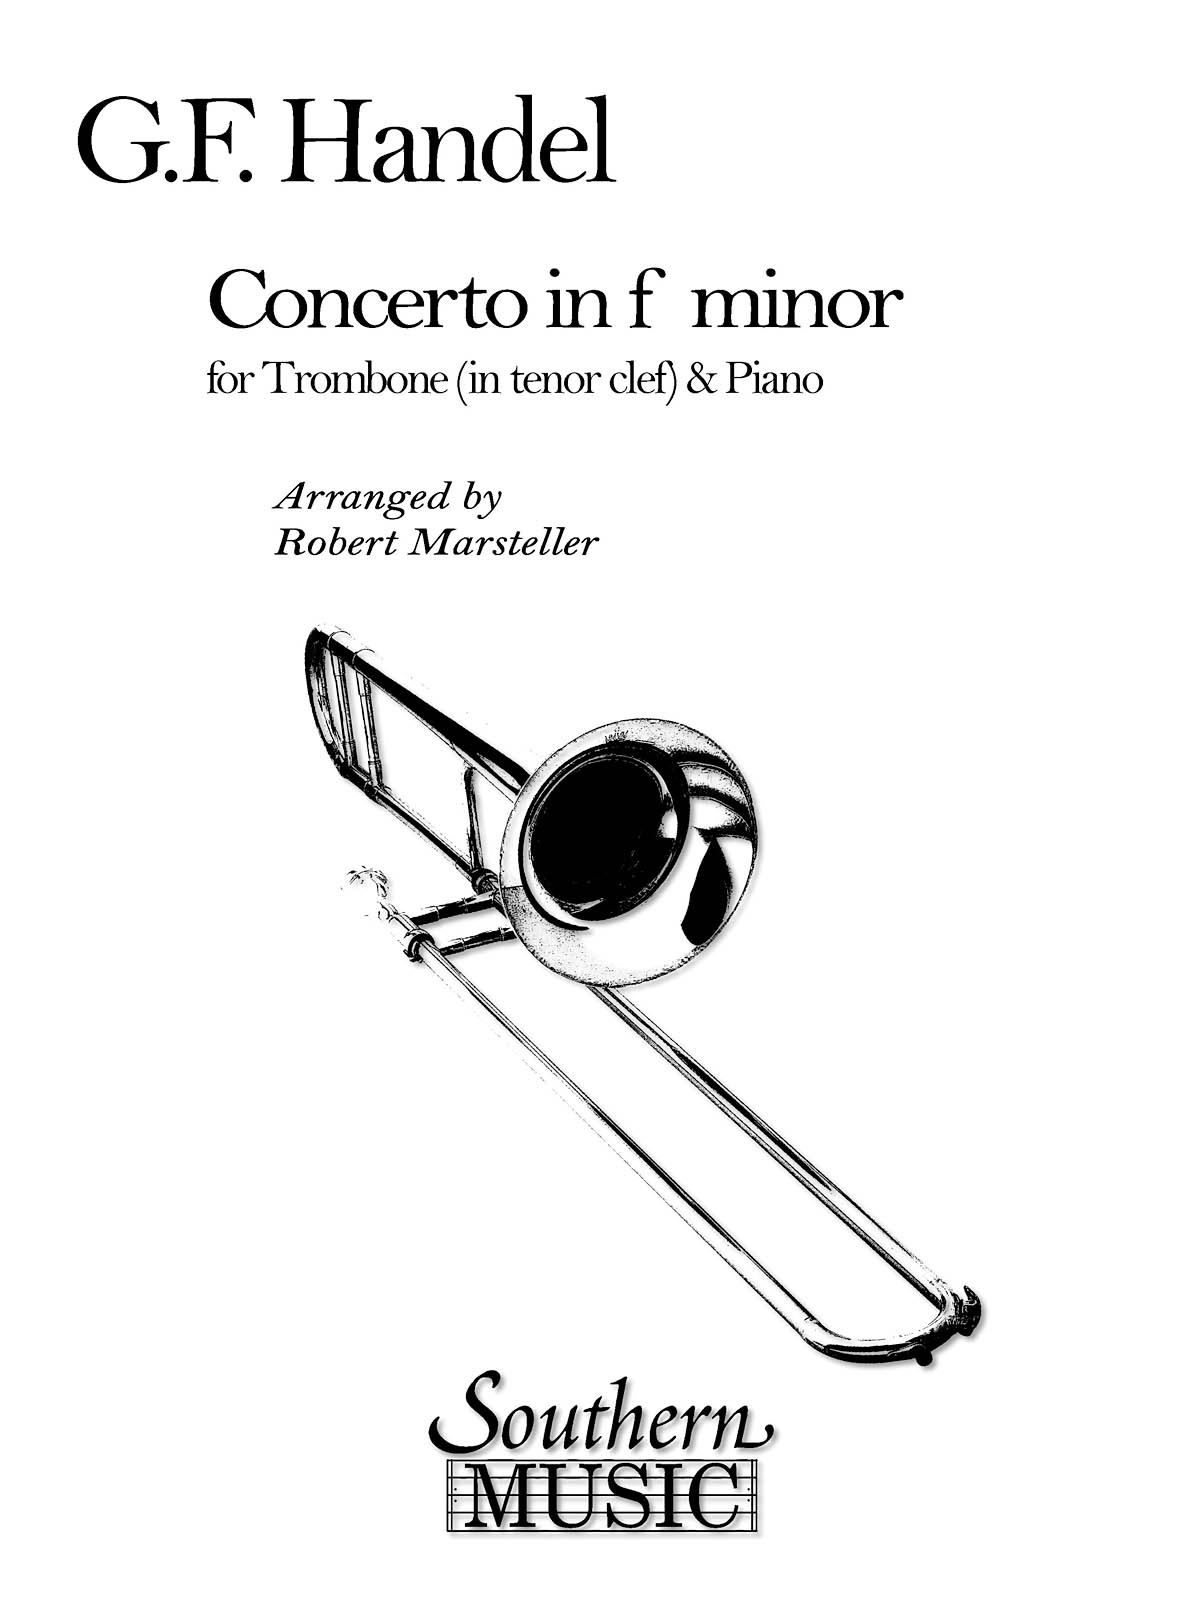 Georg Friedrich Hndel: Concerto In F Minor: Trombone and Accomp.: Part